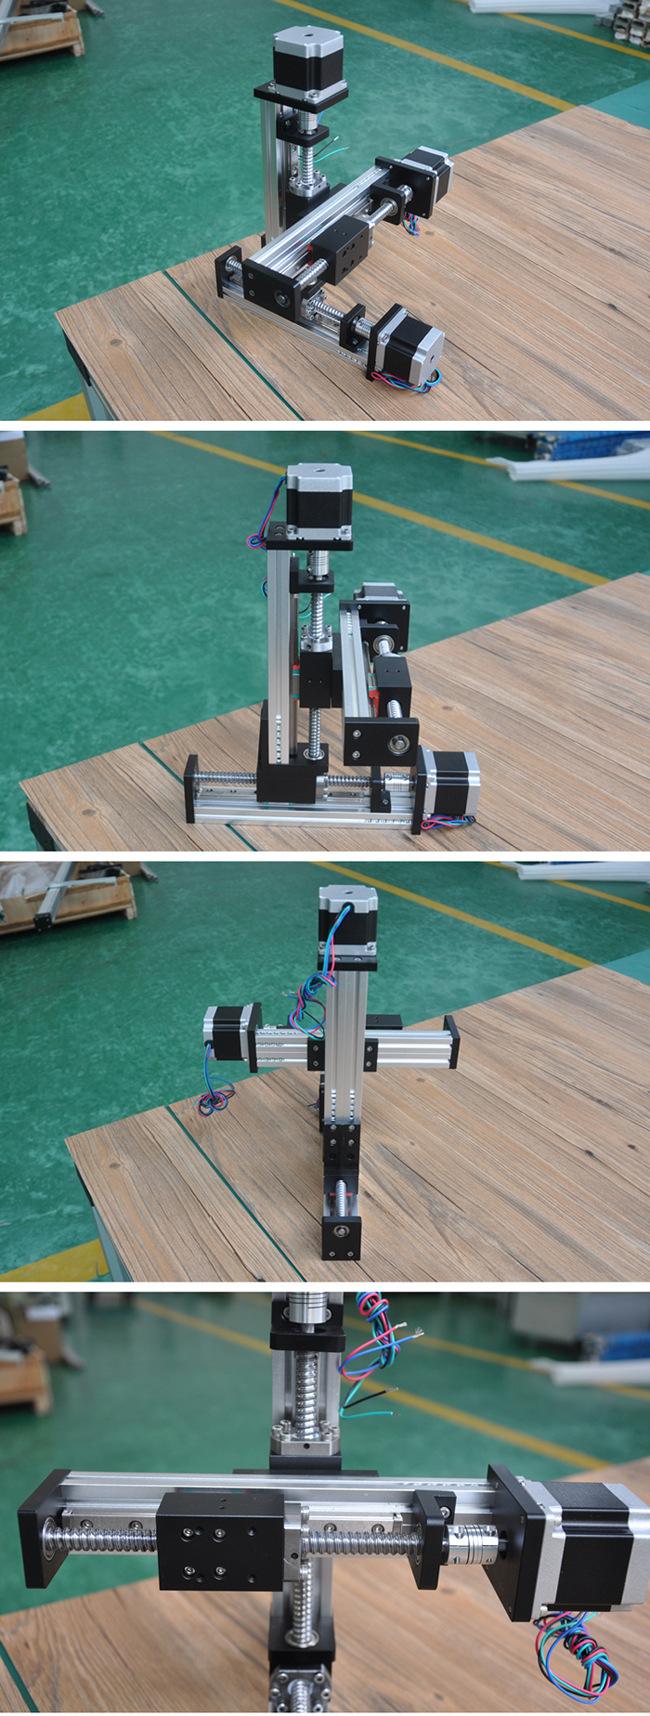 3 Axis Table Xyz Stage Vertical Positioning System Ball Screw Linear Guide with Stepper Motor